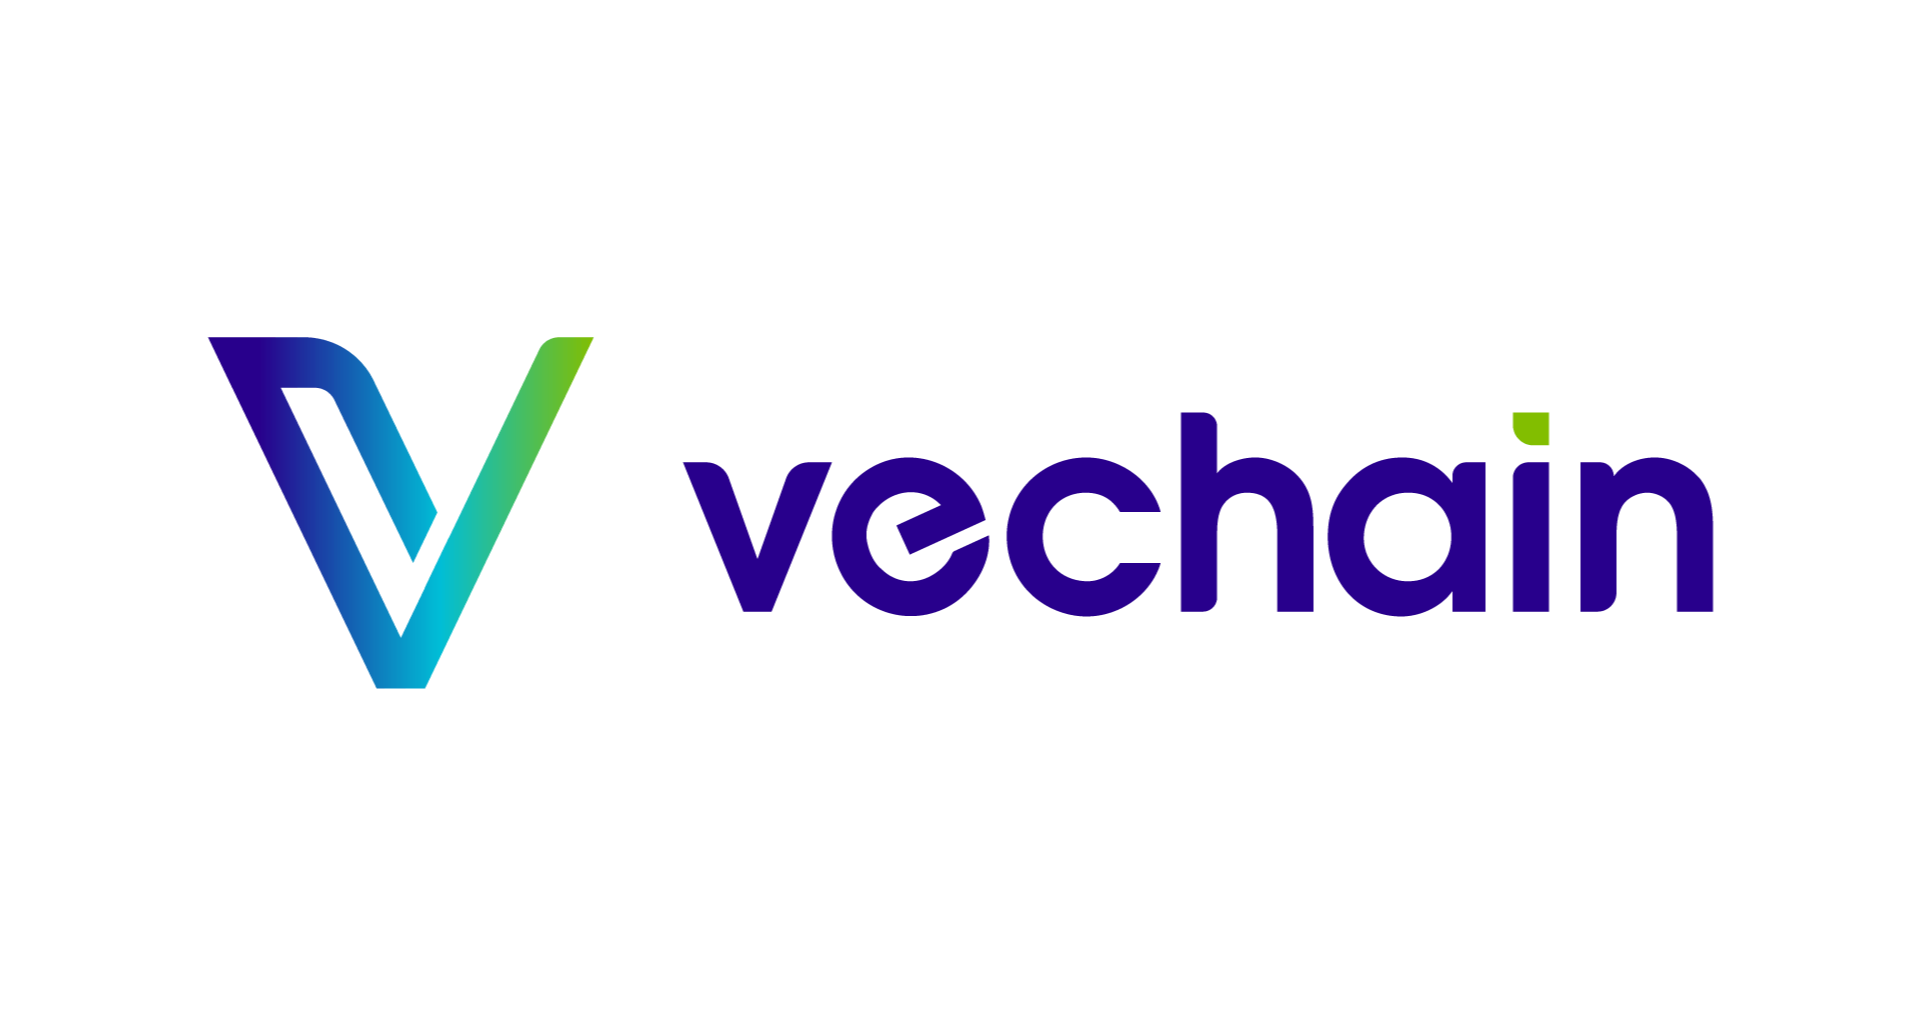 The new logo of the VeChain Foundation.